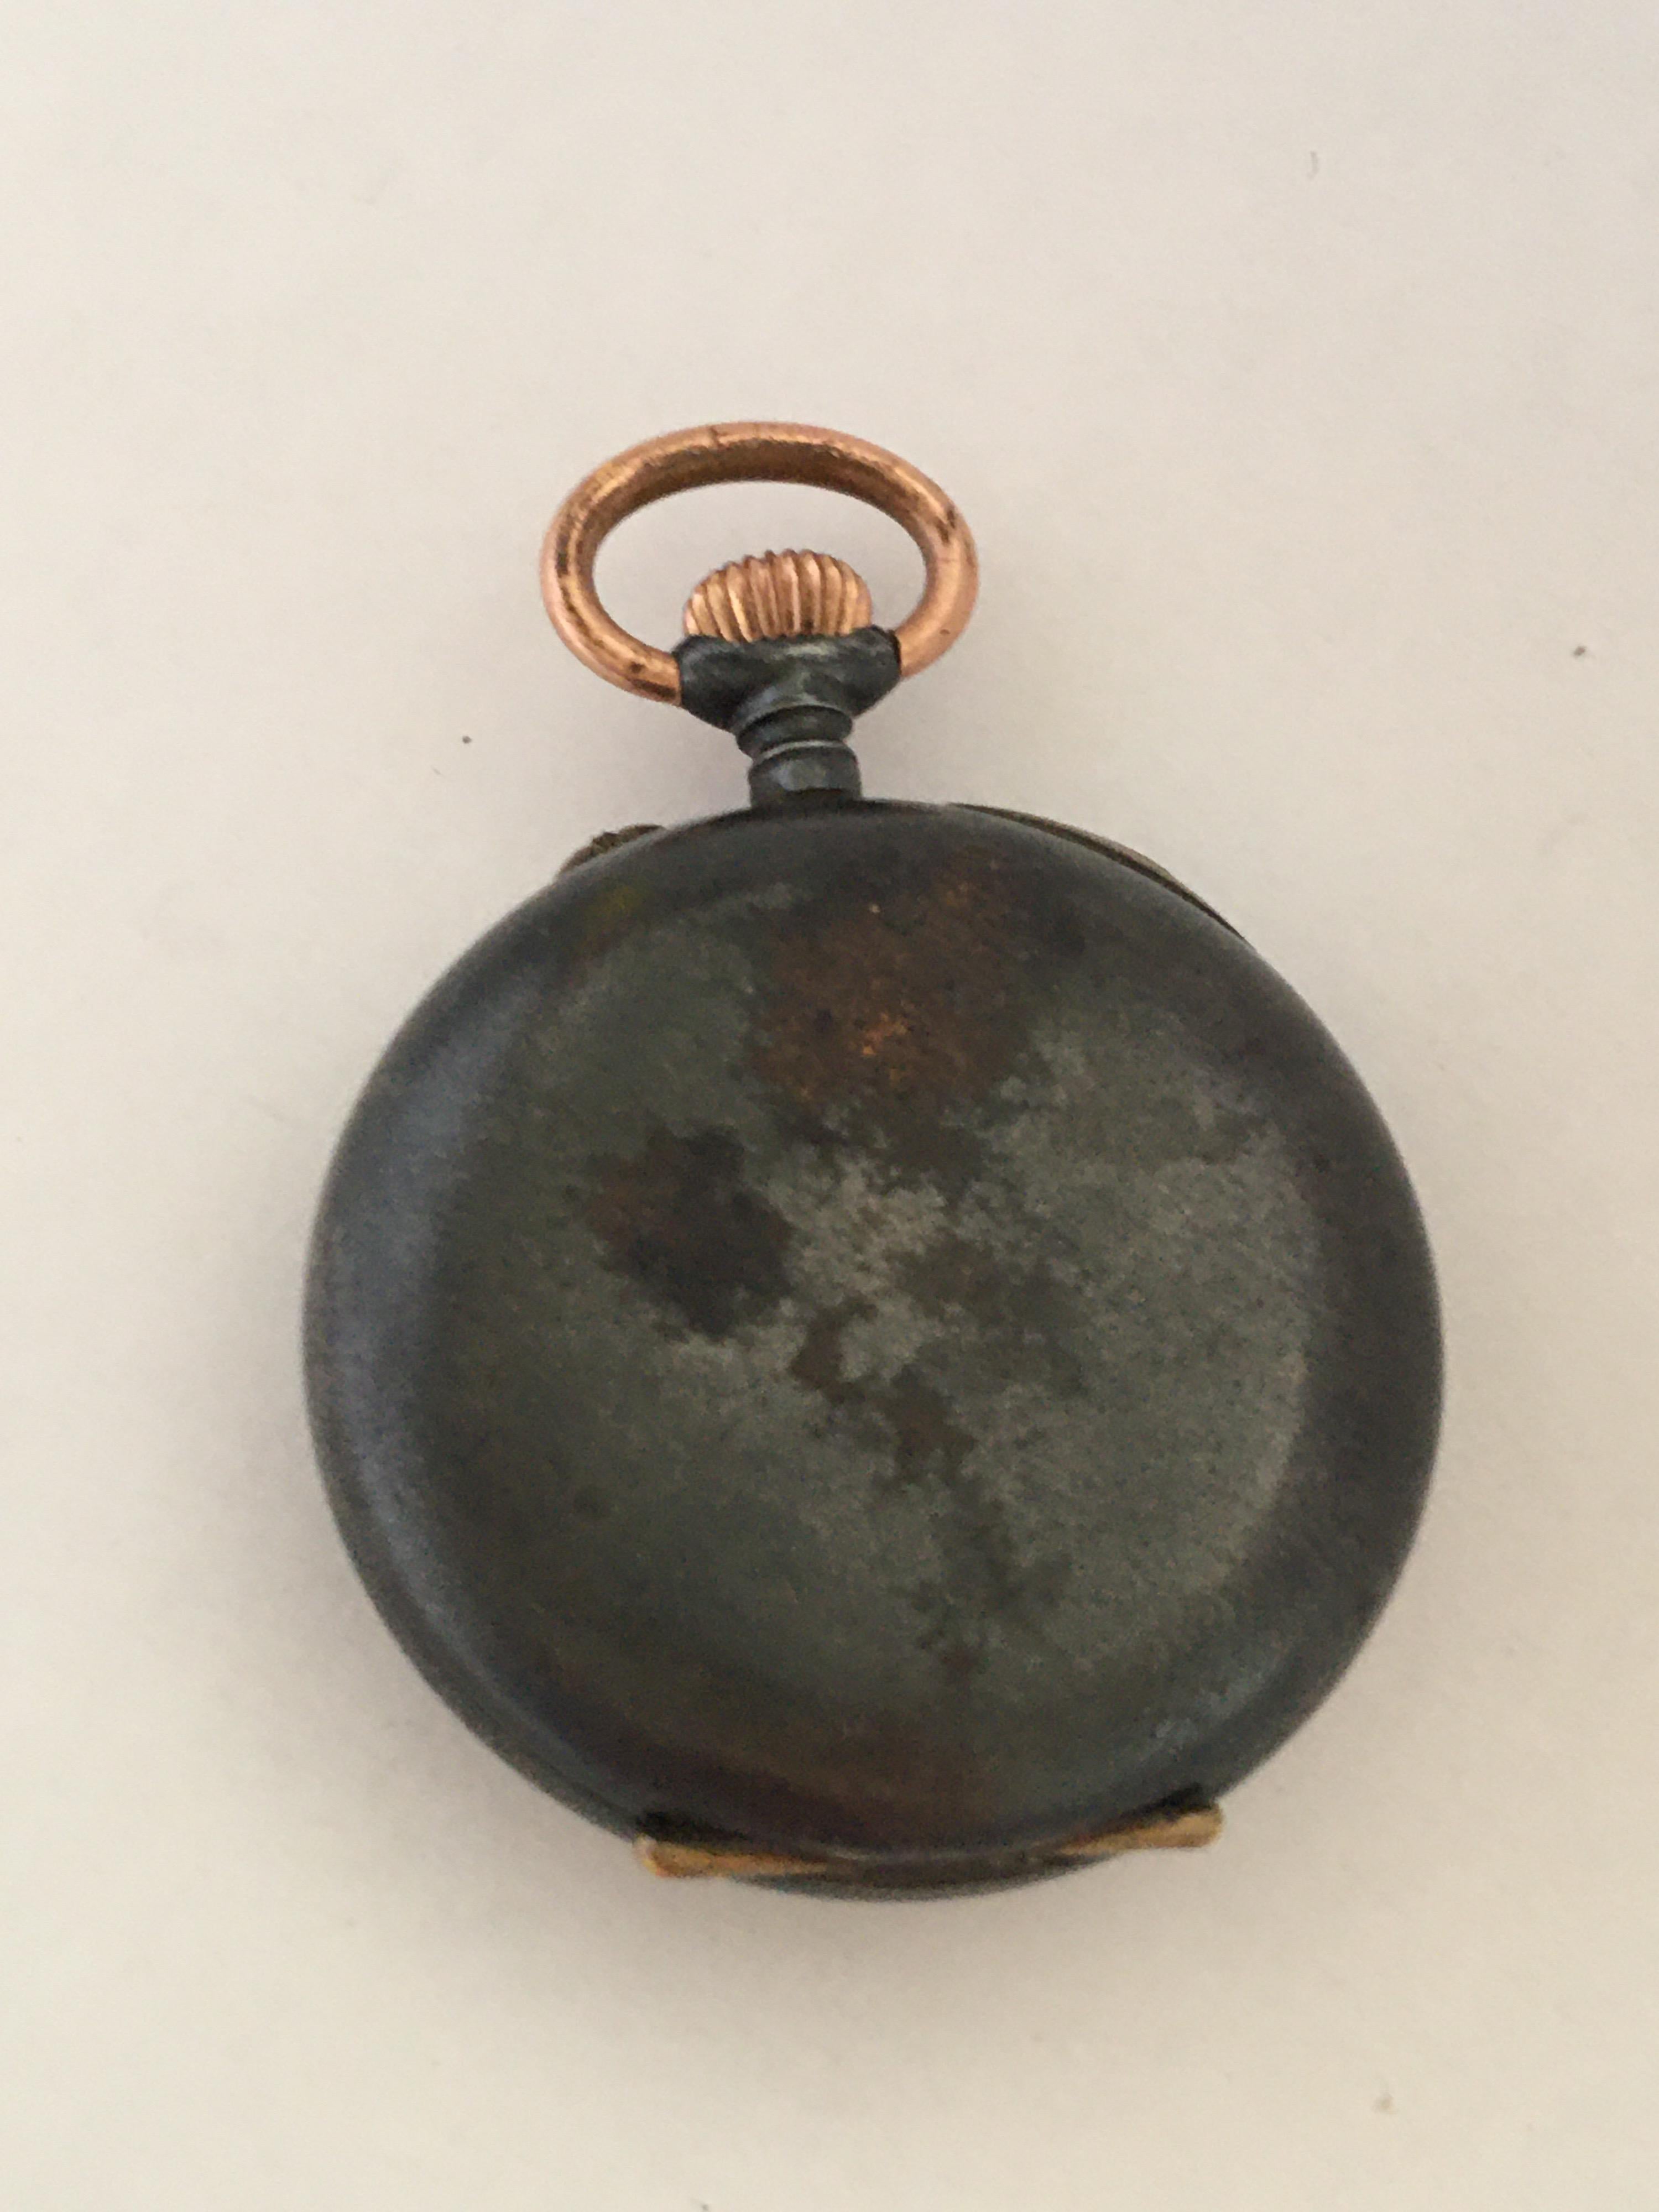 This beautiful antique  small pocket watch is working and ticking well. The back cover case is a bit tarnished.